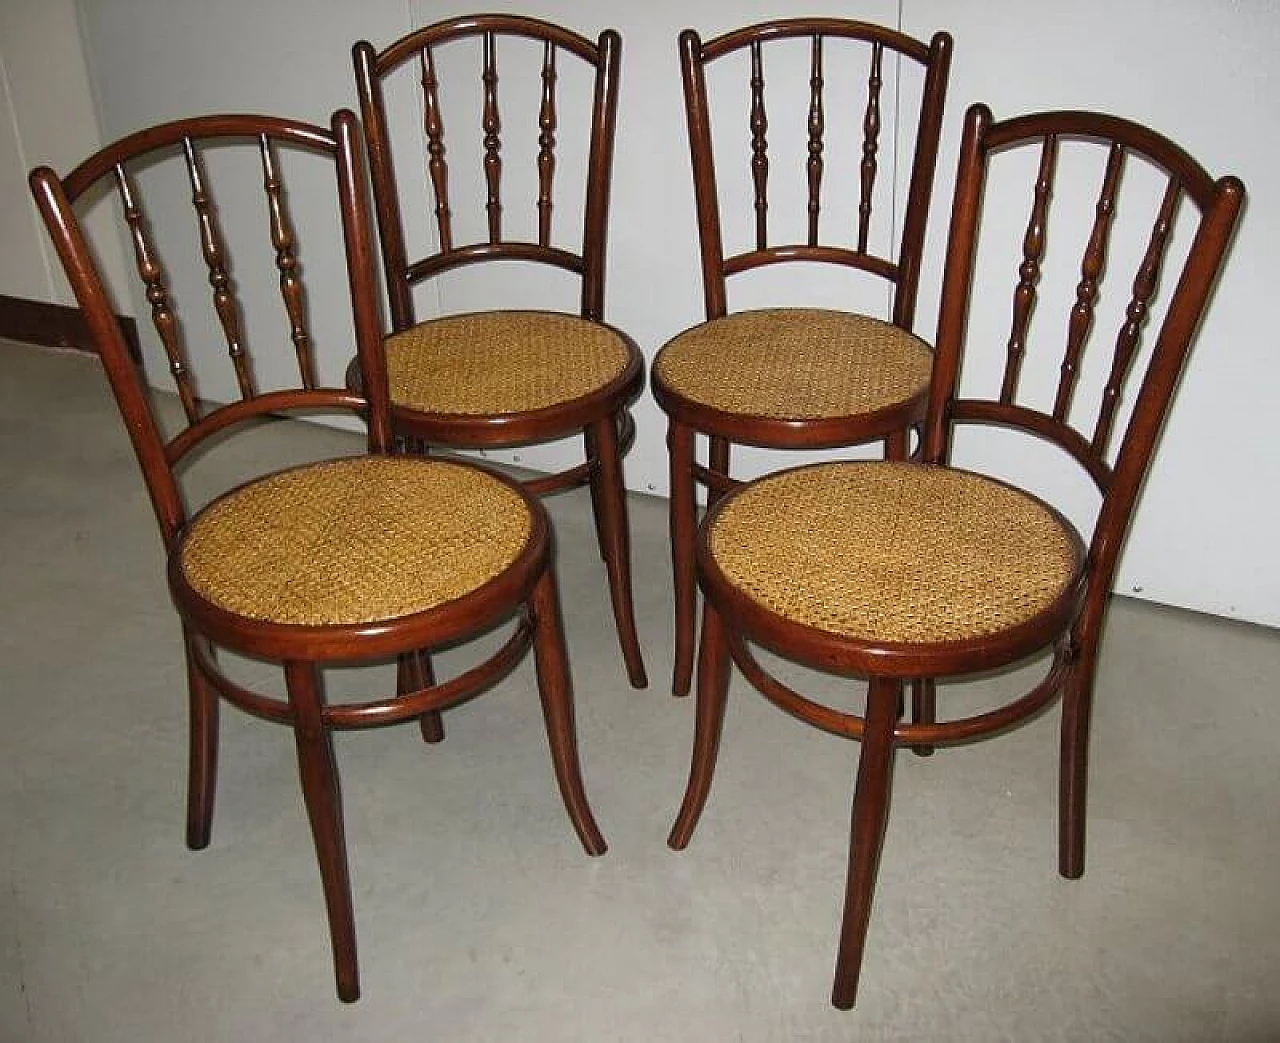 Series of 4 chairs marked with the brand J & J Kohn Wien Austria, beginning 20th century 1324135